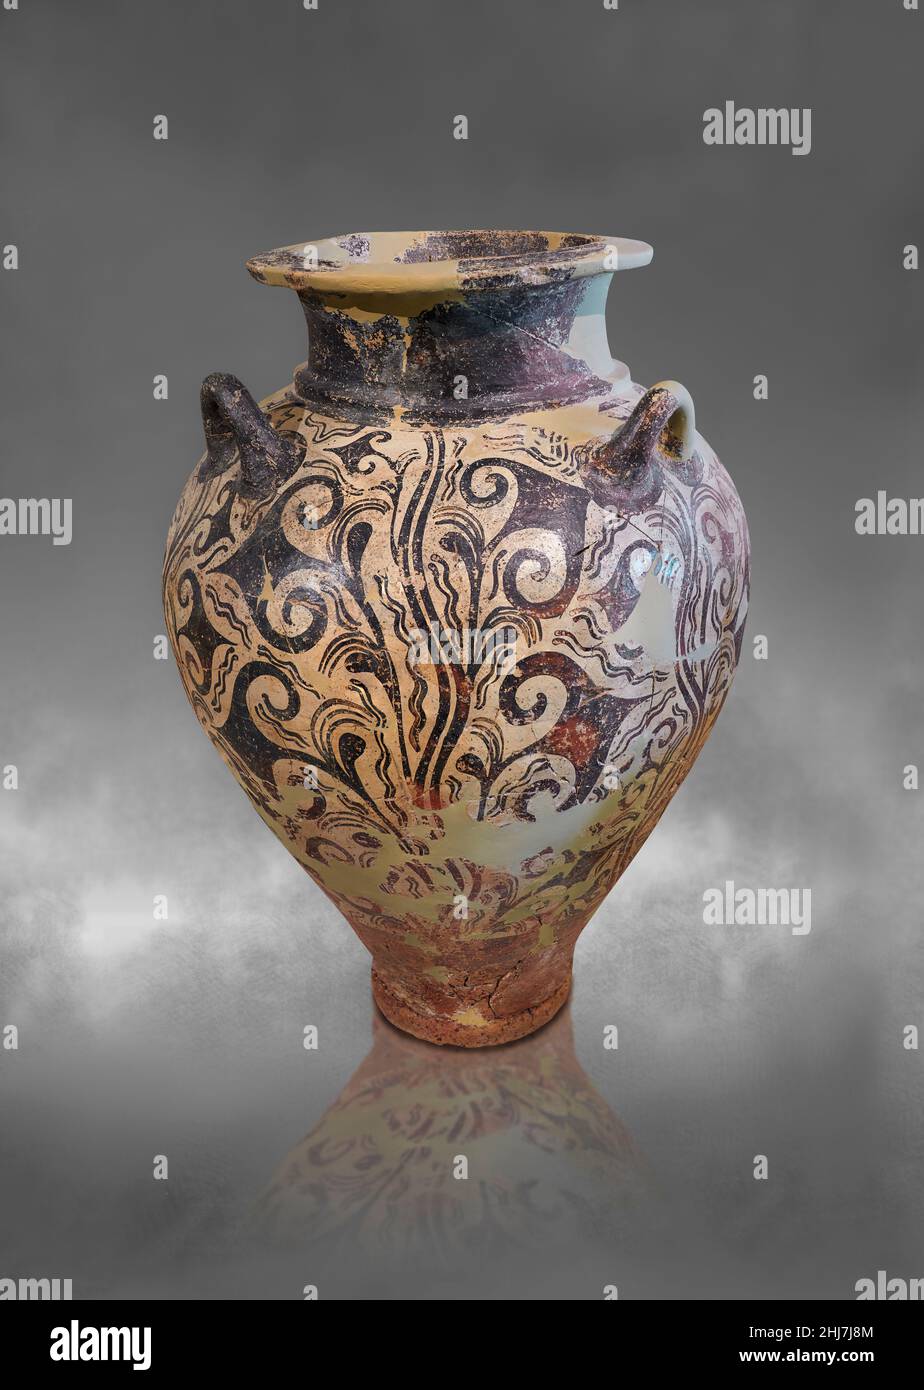 Mycenaean Palace style pottery - Piriform jar with stylised floral deign, possibly papyrus,  with water ripples. Kazarma tholos tomb, 1500-1450 BC. . Stock Photo